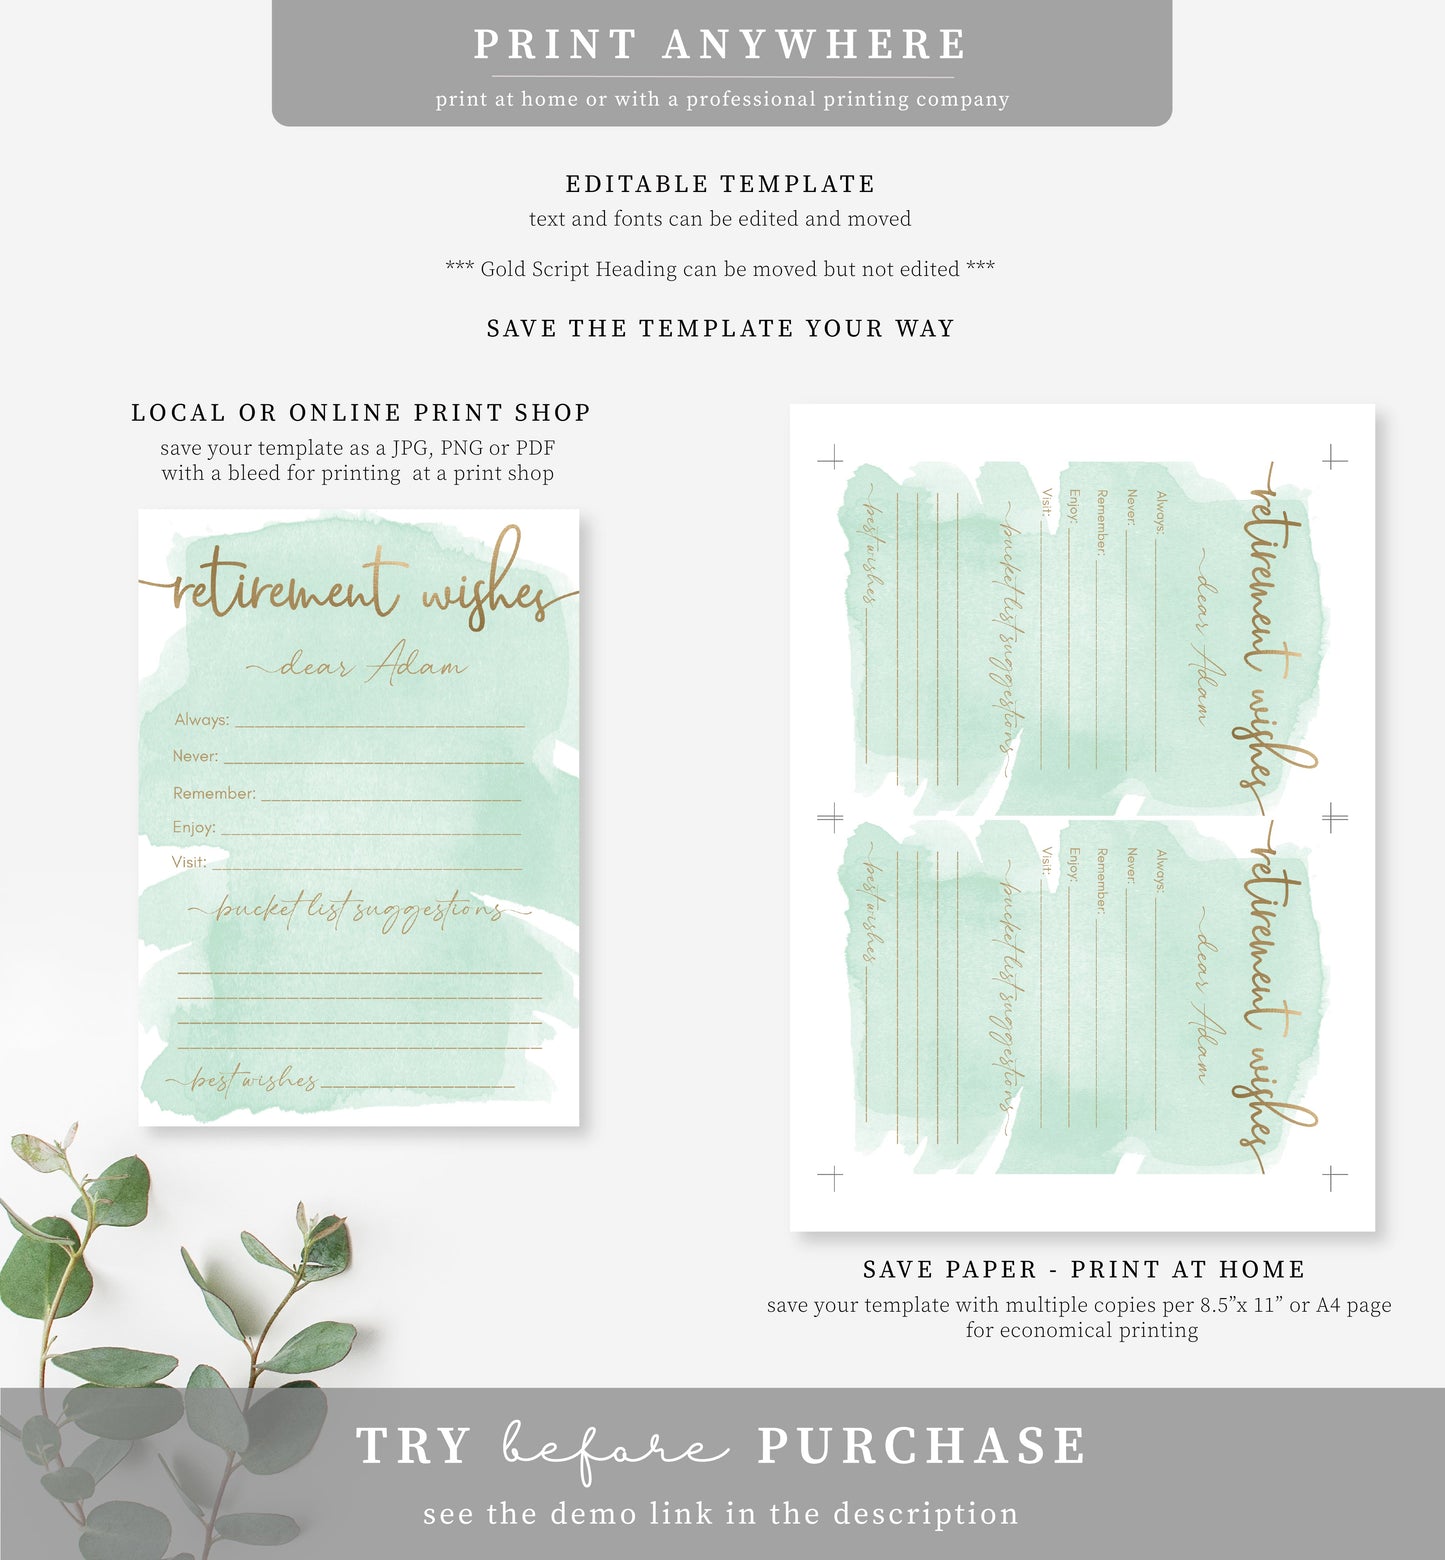 Watercolour Green Gold | Printable Retirement Wishes Card Template